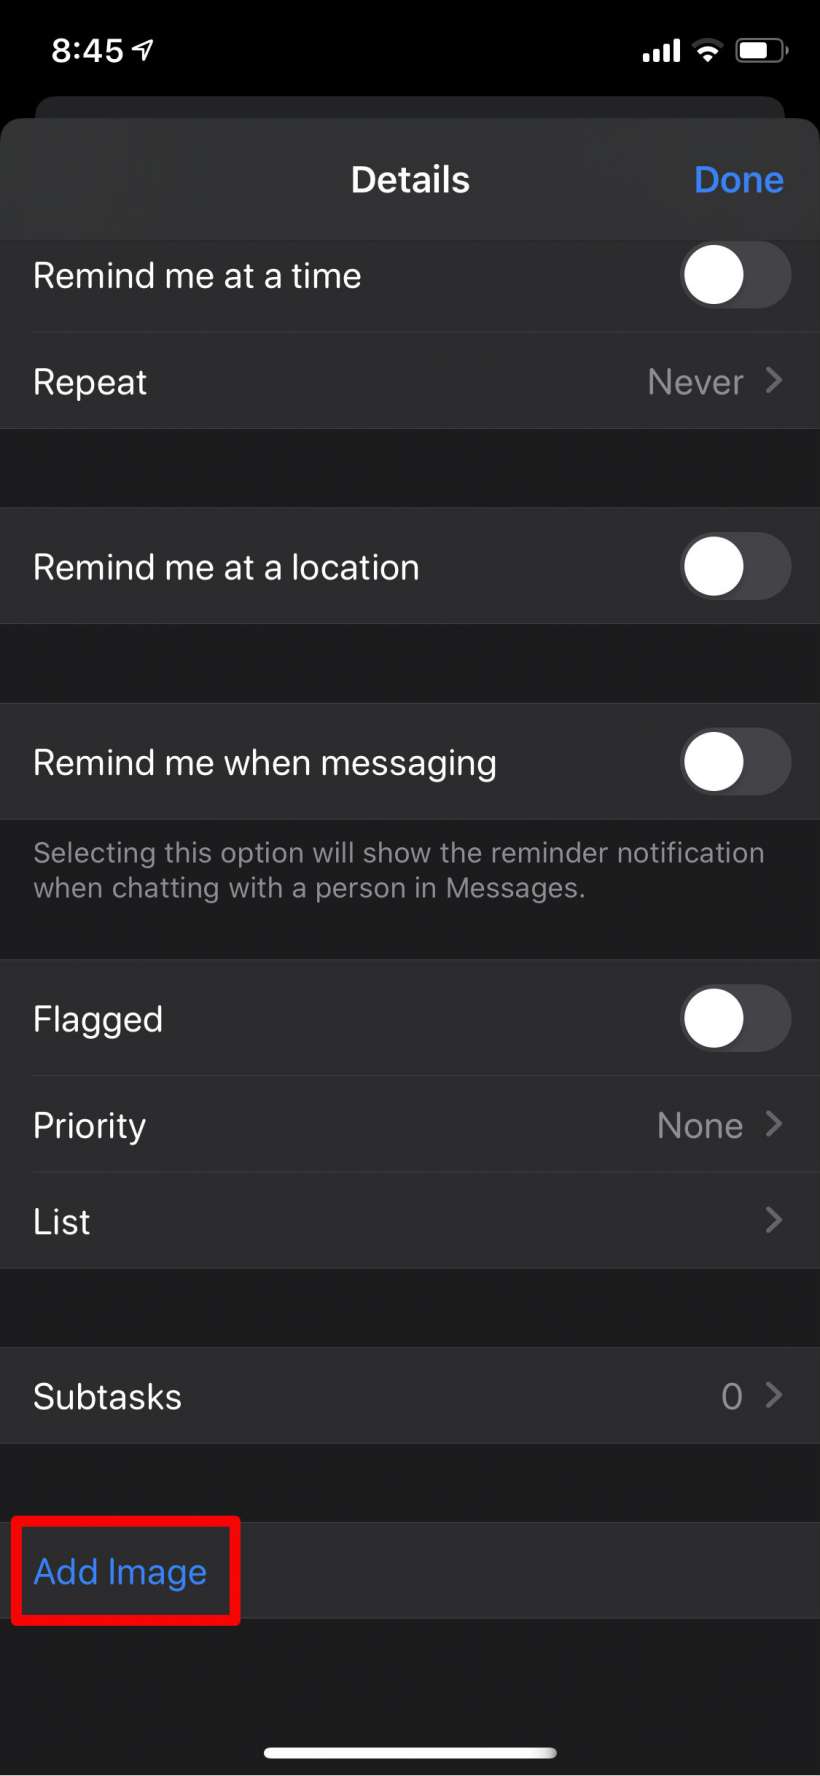 How to attach photos and scanned documents to your Reminders on iPhone and iPad.